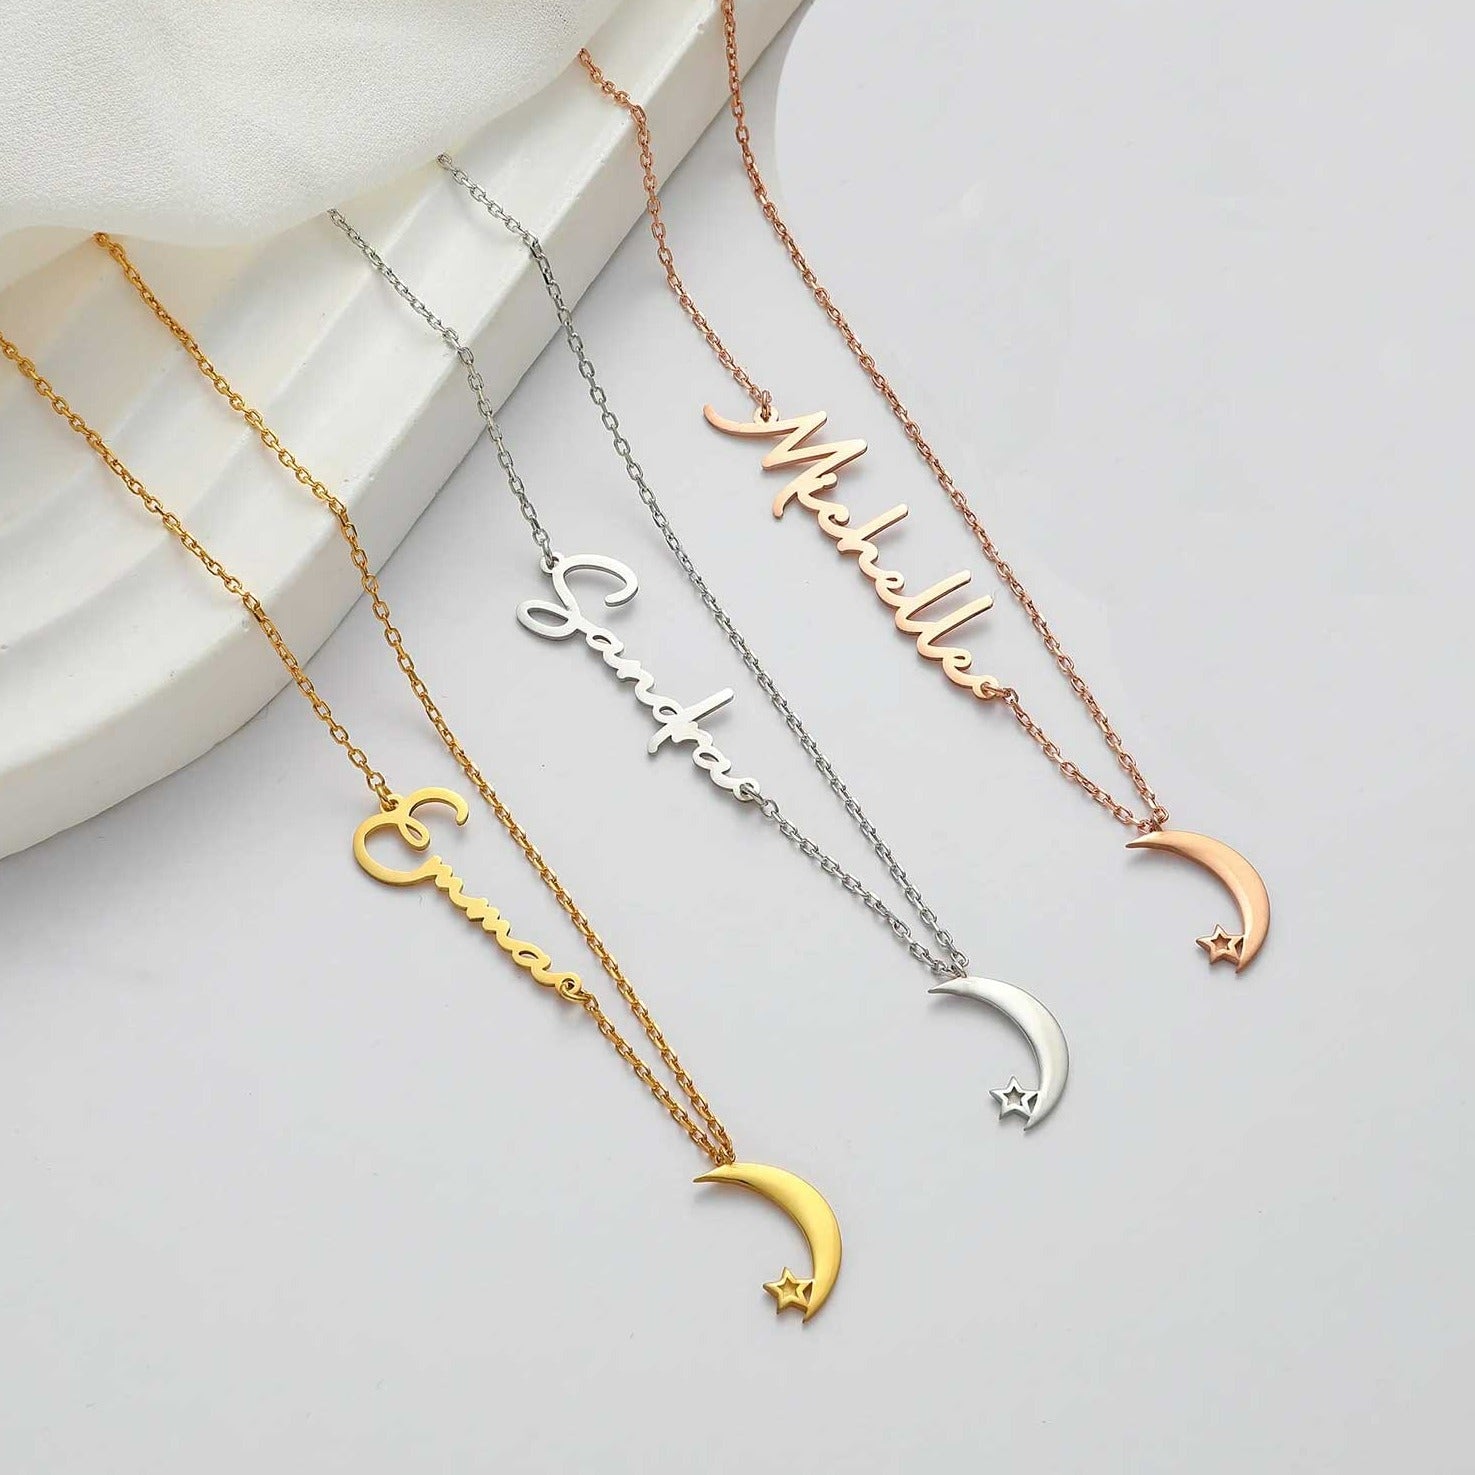 18 Carat Gold Crescent Moon Name Necklace - Personalized elegance meets celestial charm, symbolizing moonlit connections in the heart of the UAE."